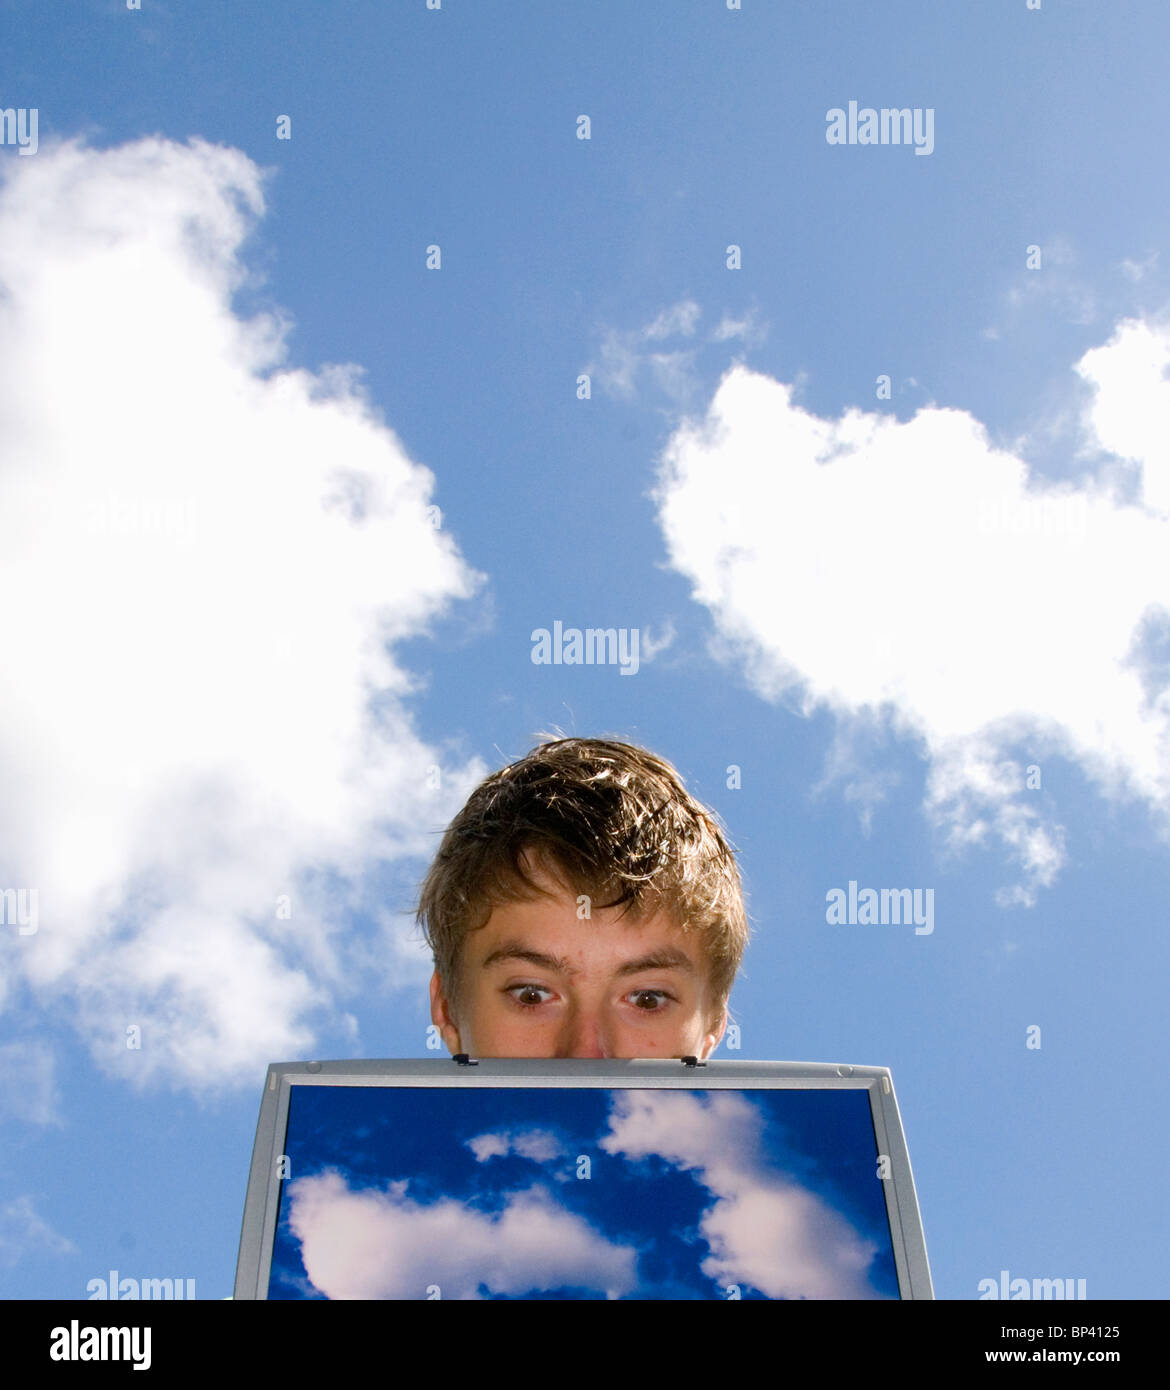 surprised person looking over laptop screen with cloud images representing cloud computing Stock Photo